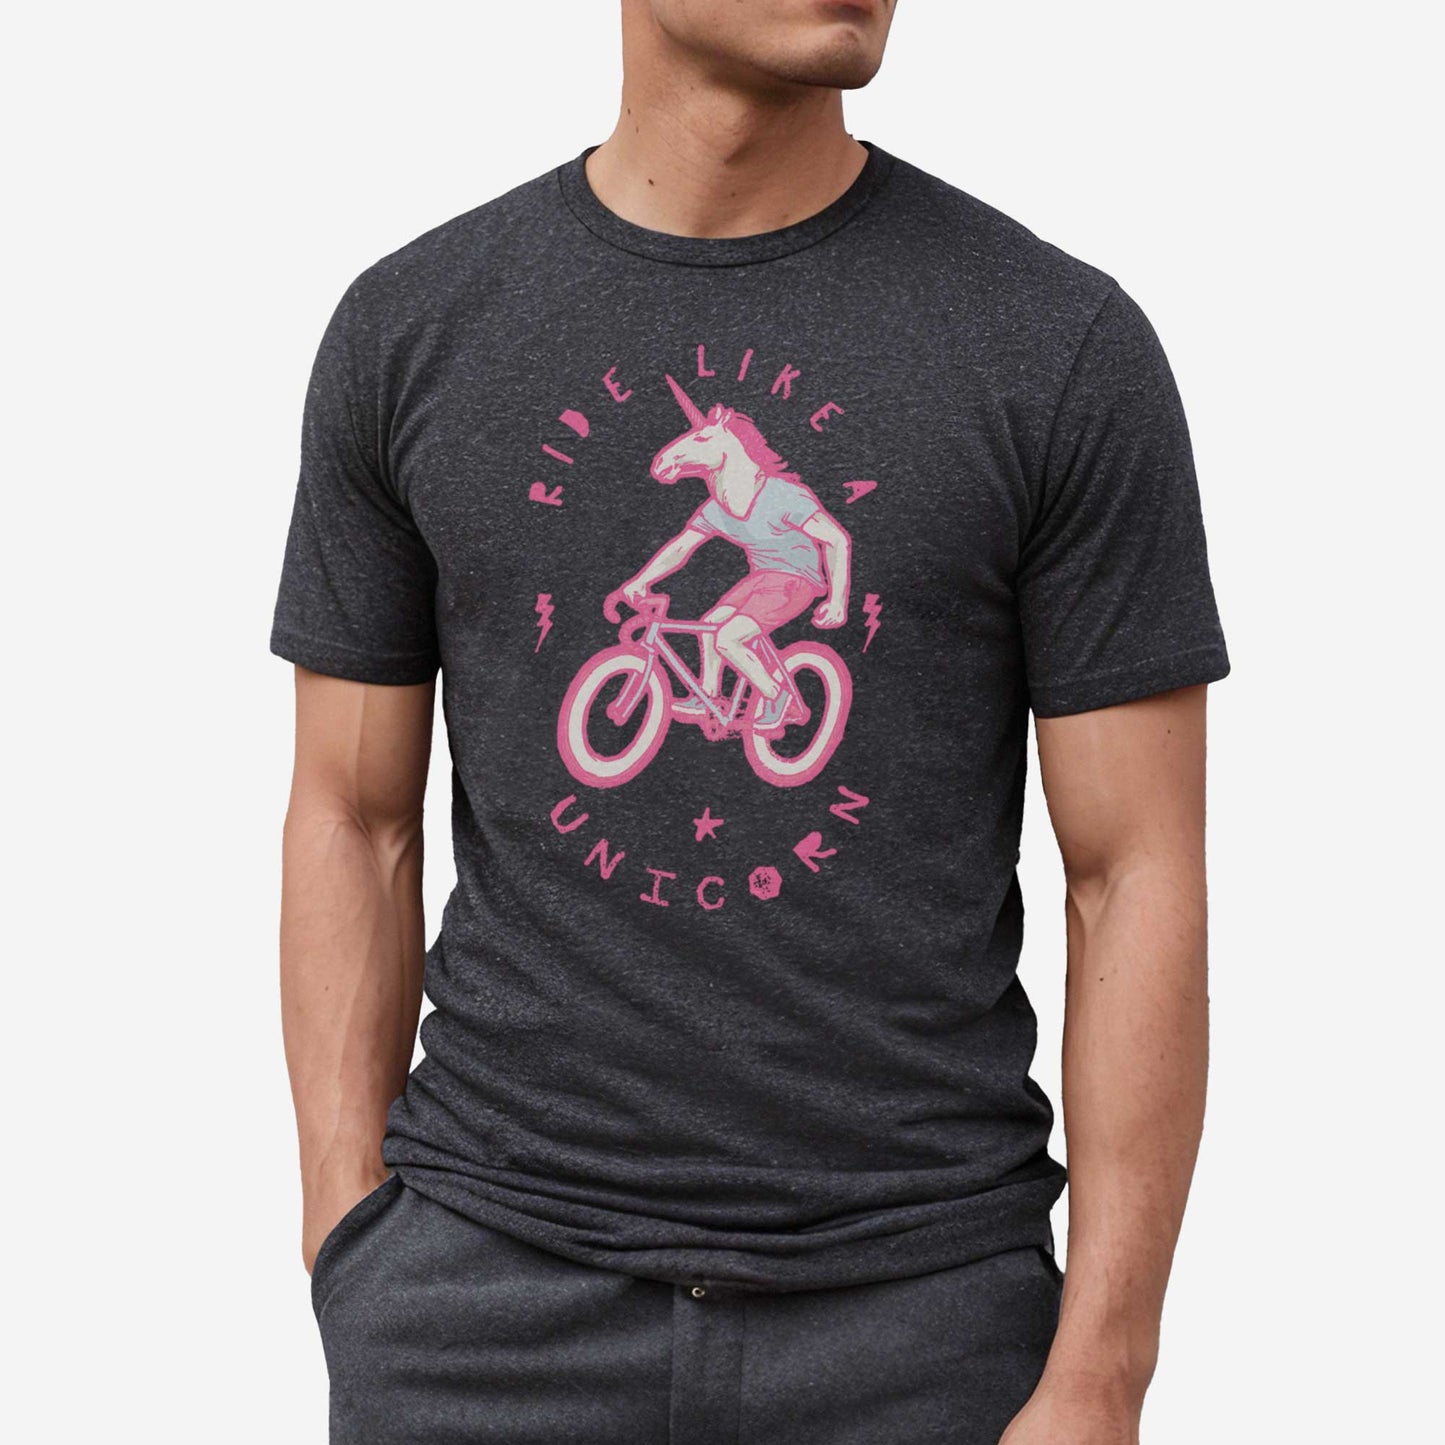 A man wearing a dark grey heather Bella Canvas t-shirt featuring a neon pink unicorn riding a bike and the words ride like a unicorn.